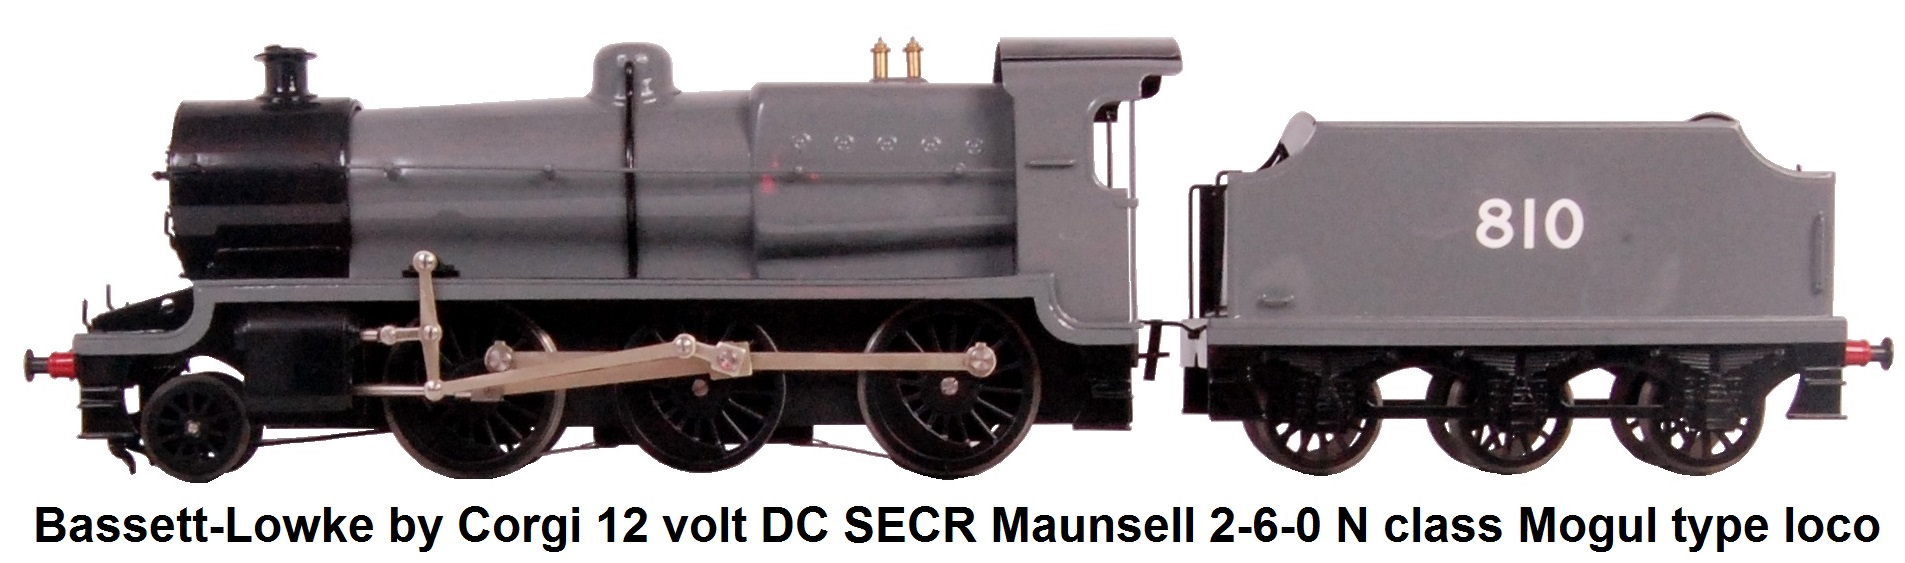 Bassett-Lowke by Corgi 'O' gauge 12 volt DC SECR Maunsell 2-6-0 N class Mogul type locomotive and tender, finished in Austerity grey with #810 to tender sides, in the original black box, limited edition